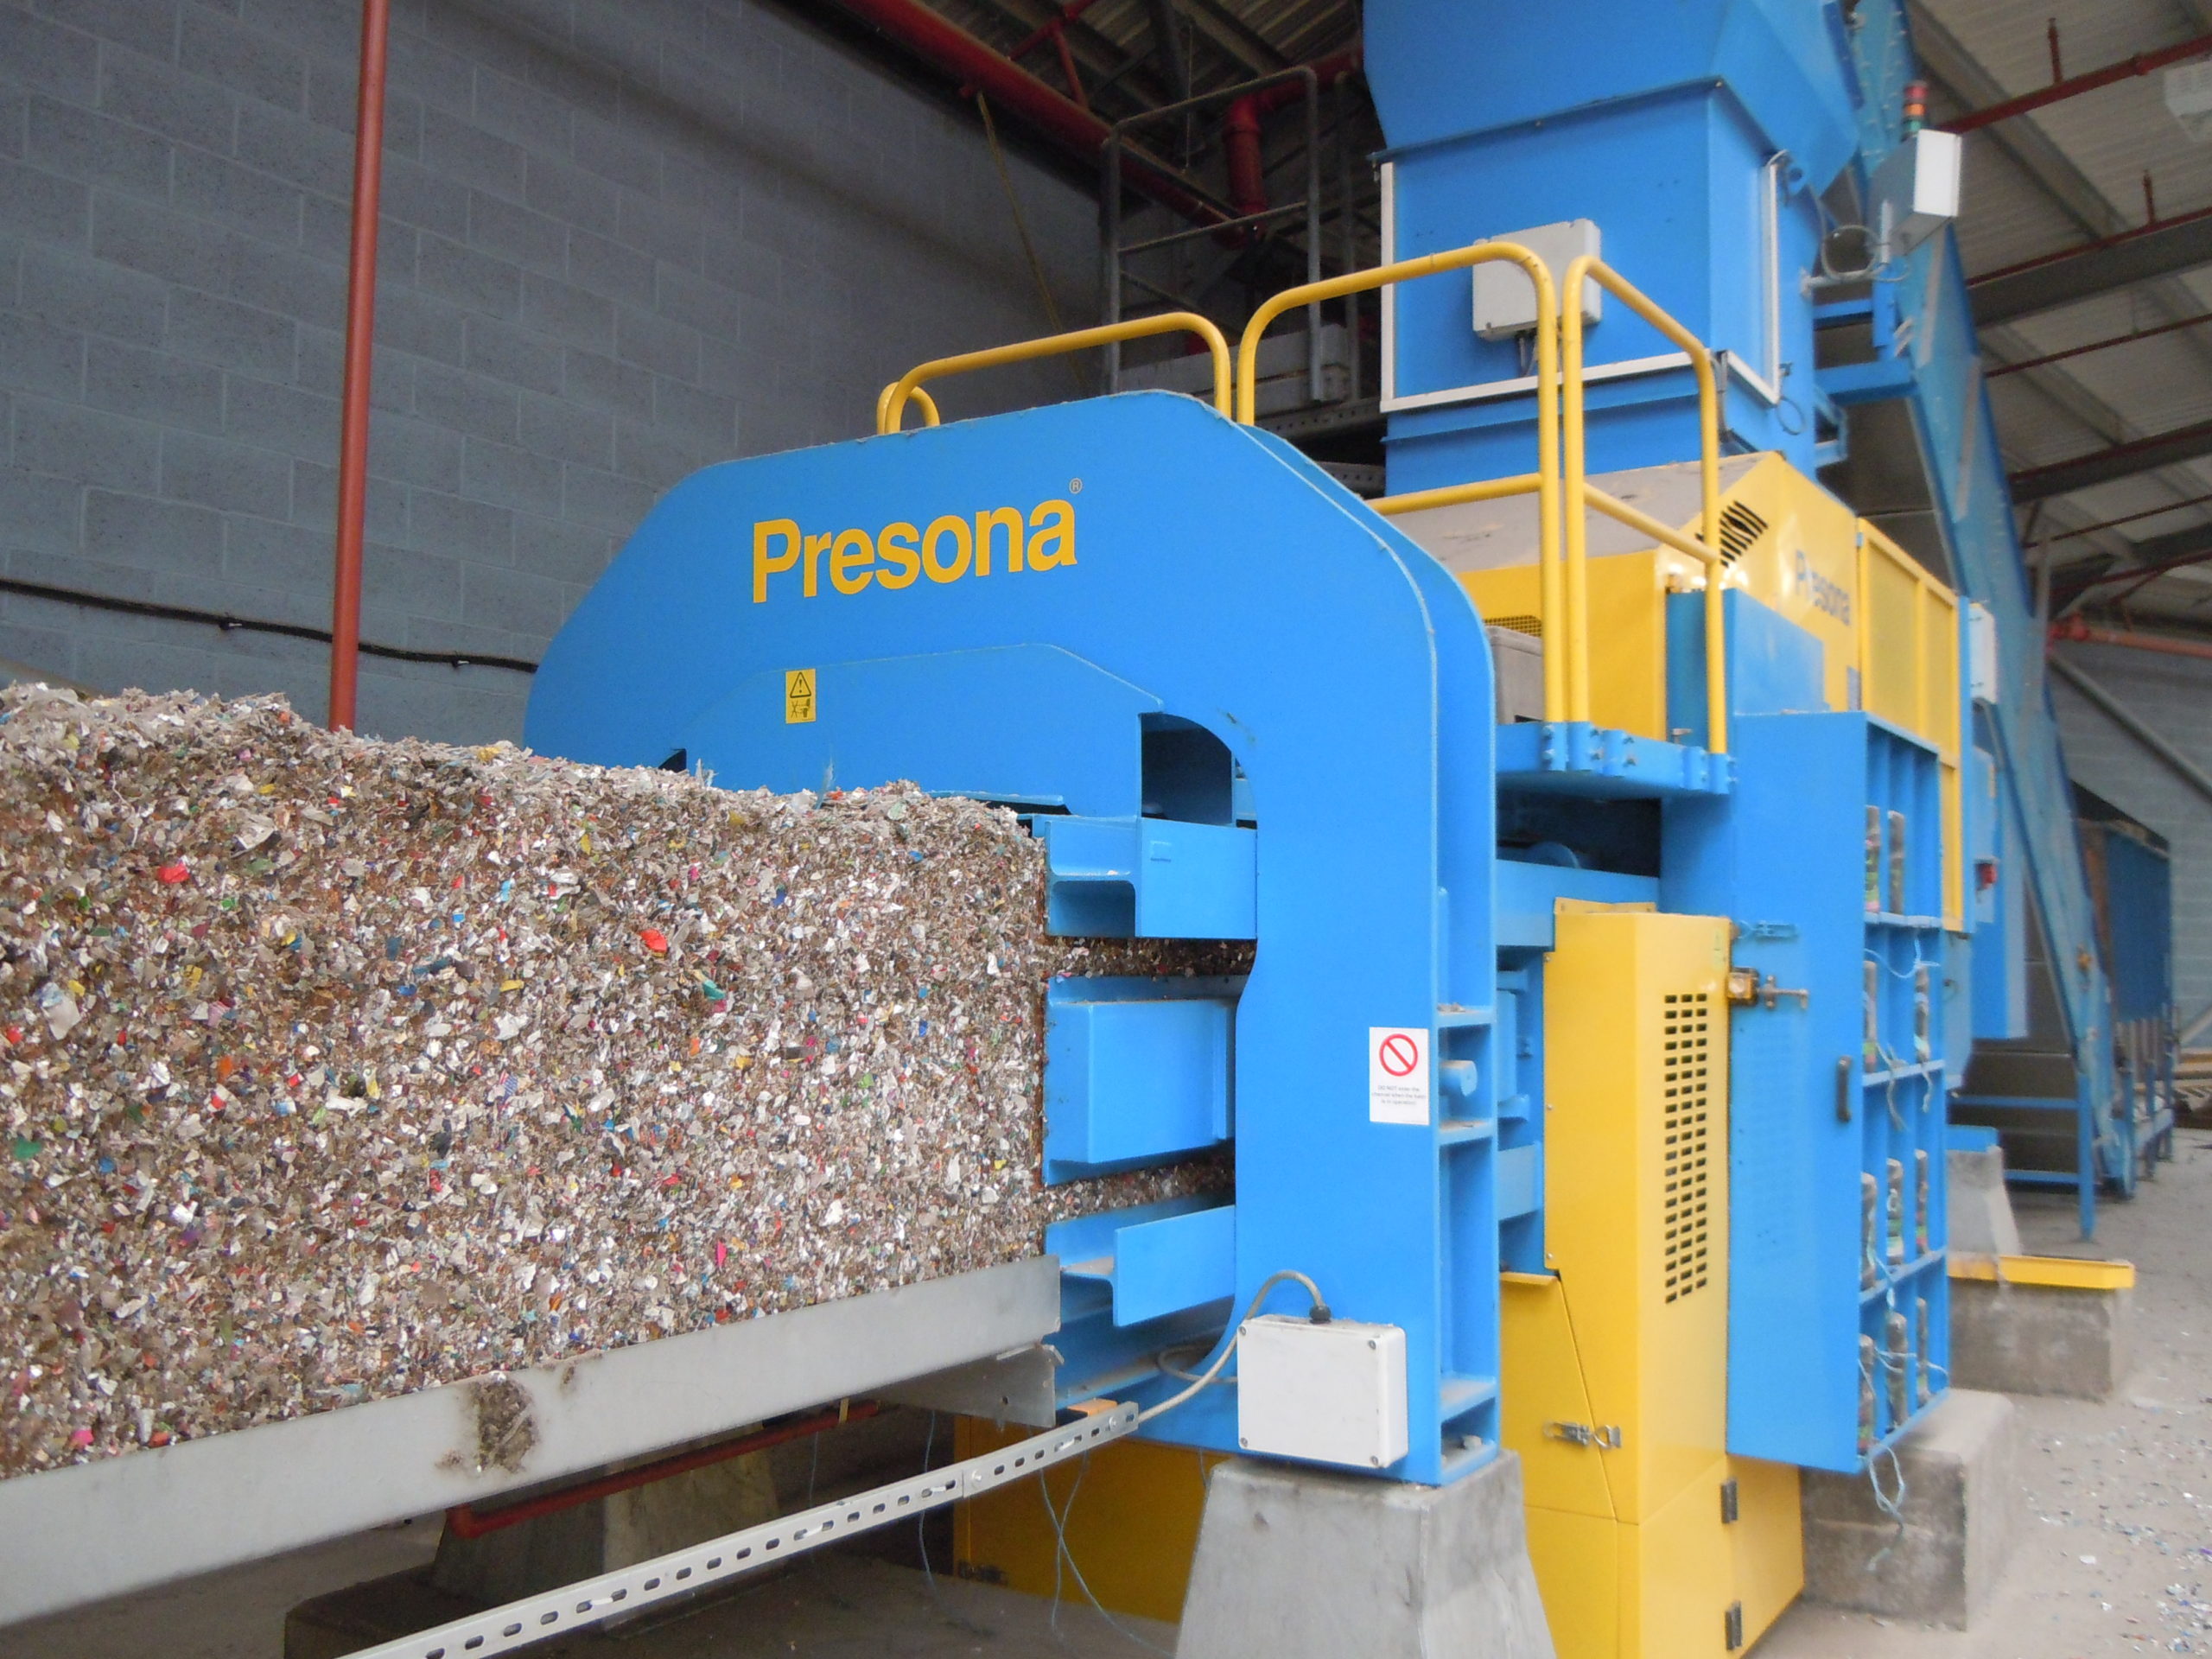 Presona manufactures balers and compactors for the waste industry